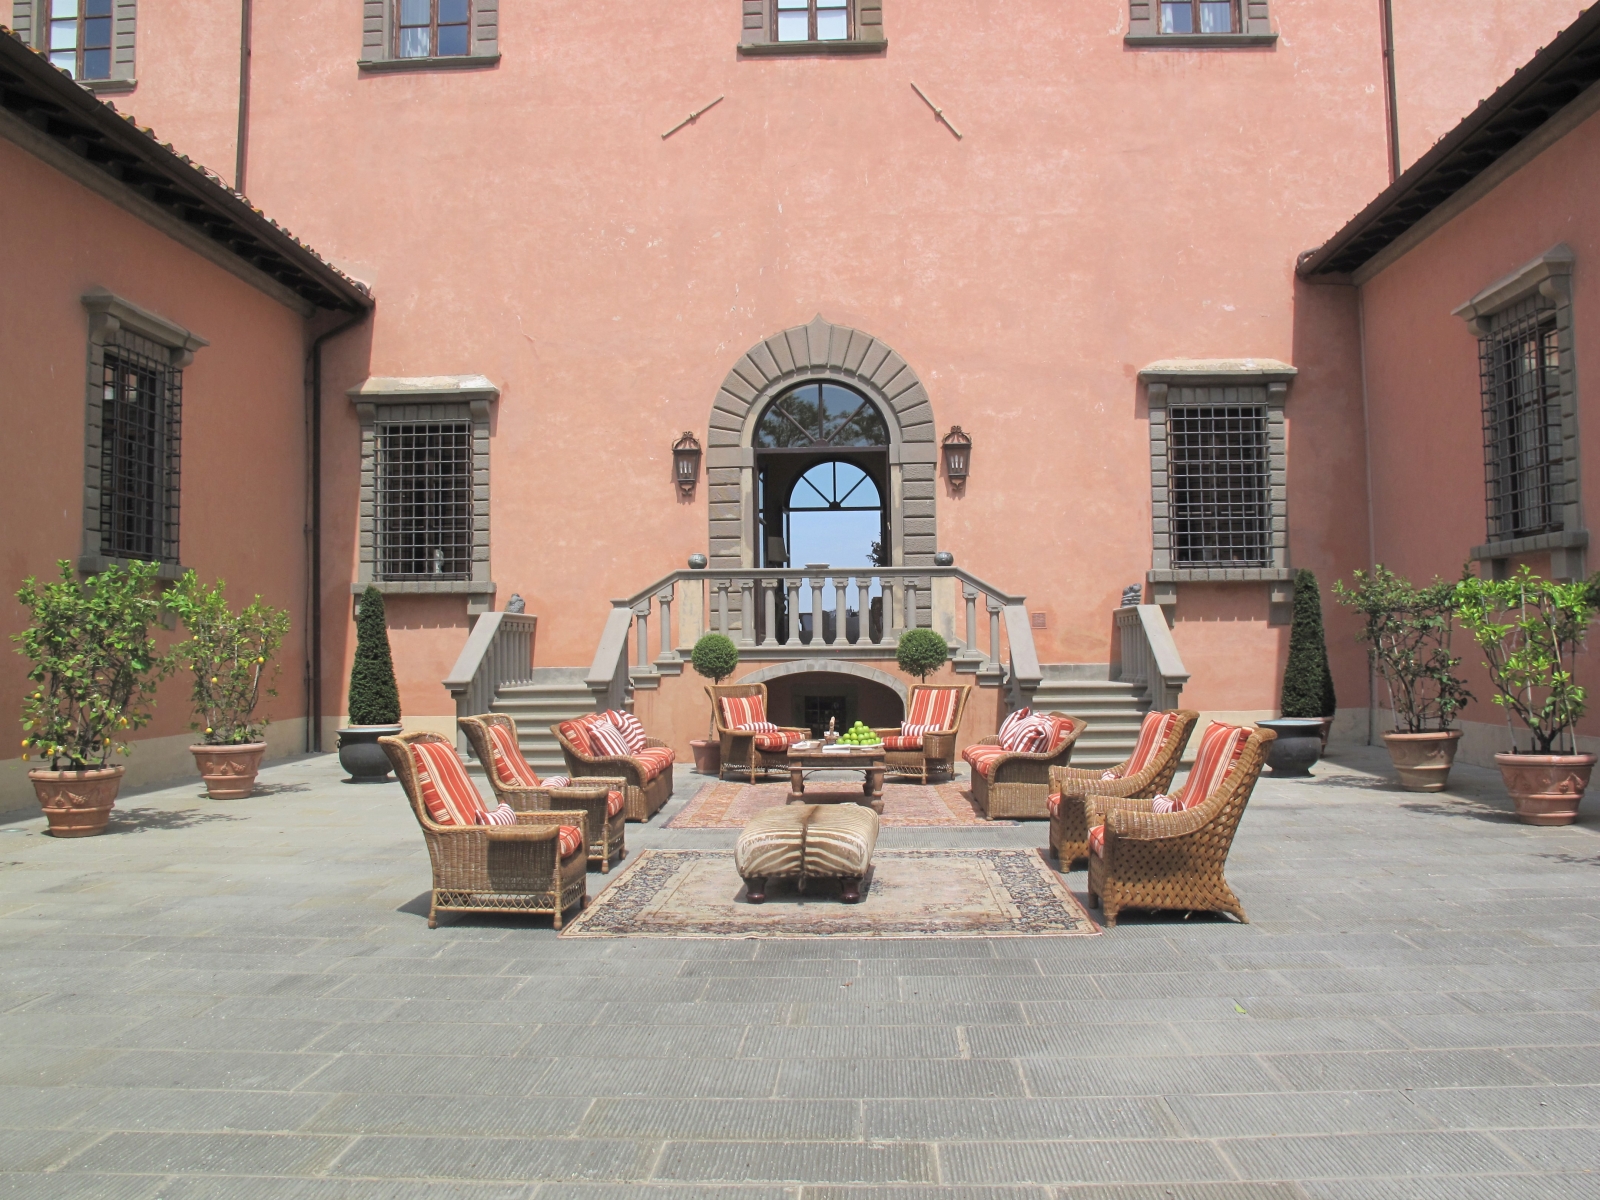 Courtyard with comfy chairs, citrus trees and stone stairs at Villa Machiavelli in Tuscany, Italy